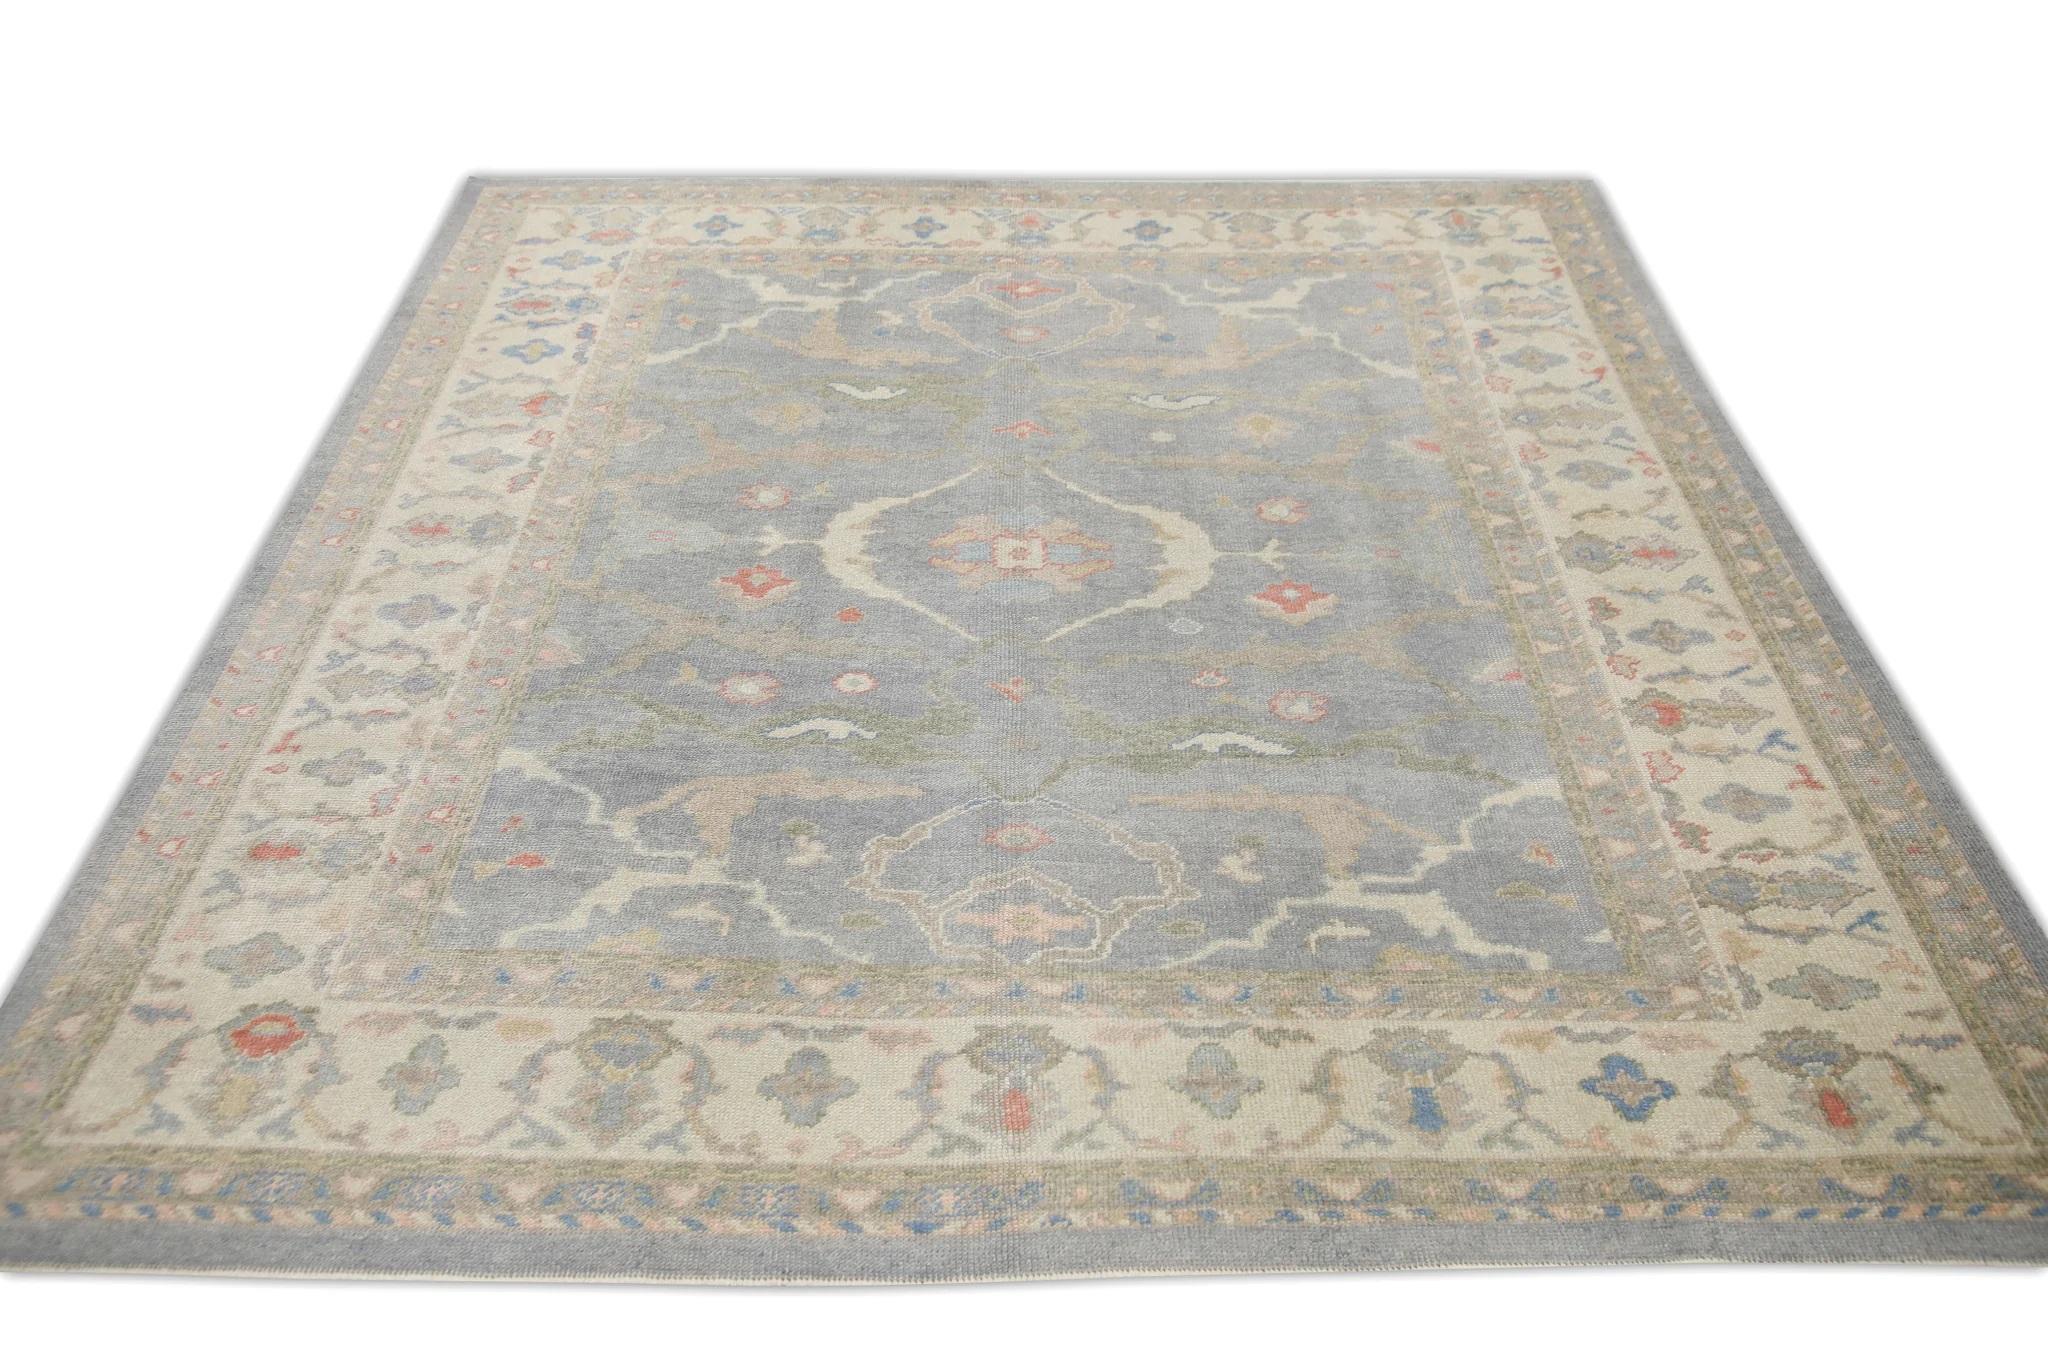 Blue Handwoven Wool Turkish Oushak Rug in Multicolor Floral Pattern 8' x 8'11